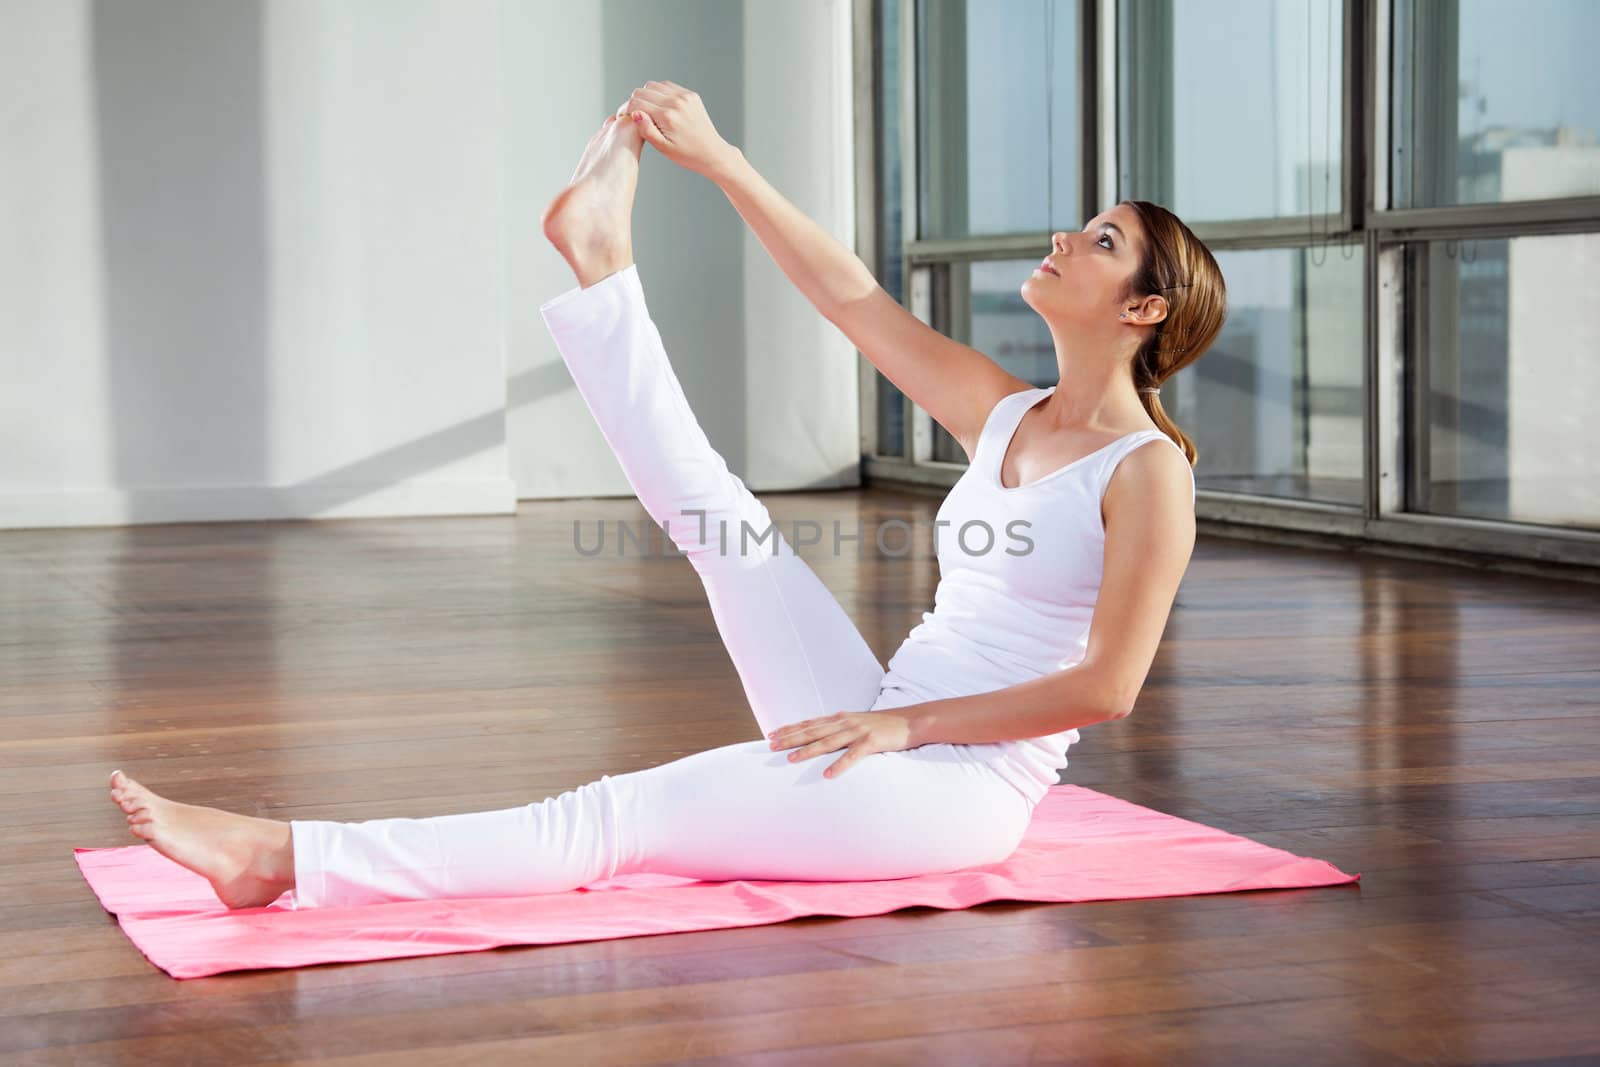 Full length of a young woman doing yoga exercise called Heron Pose at gym